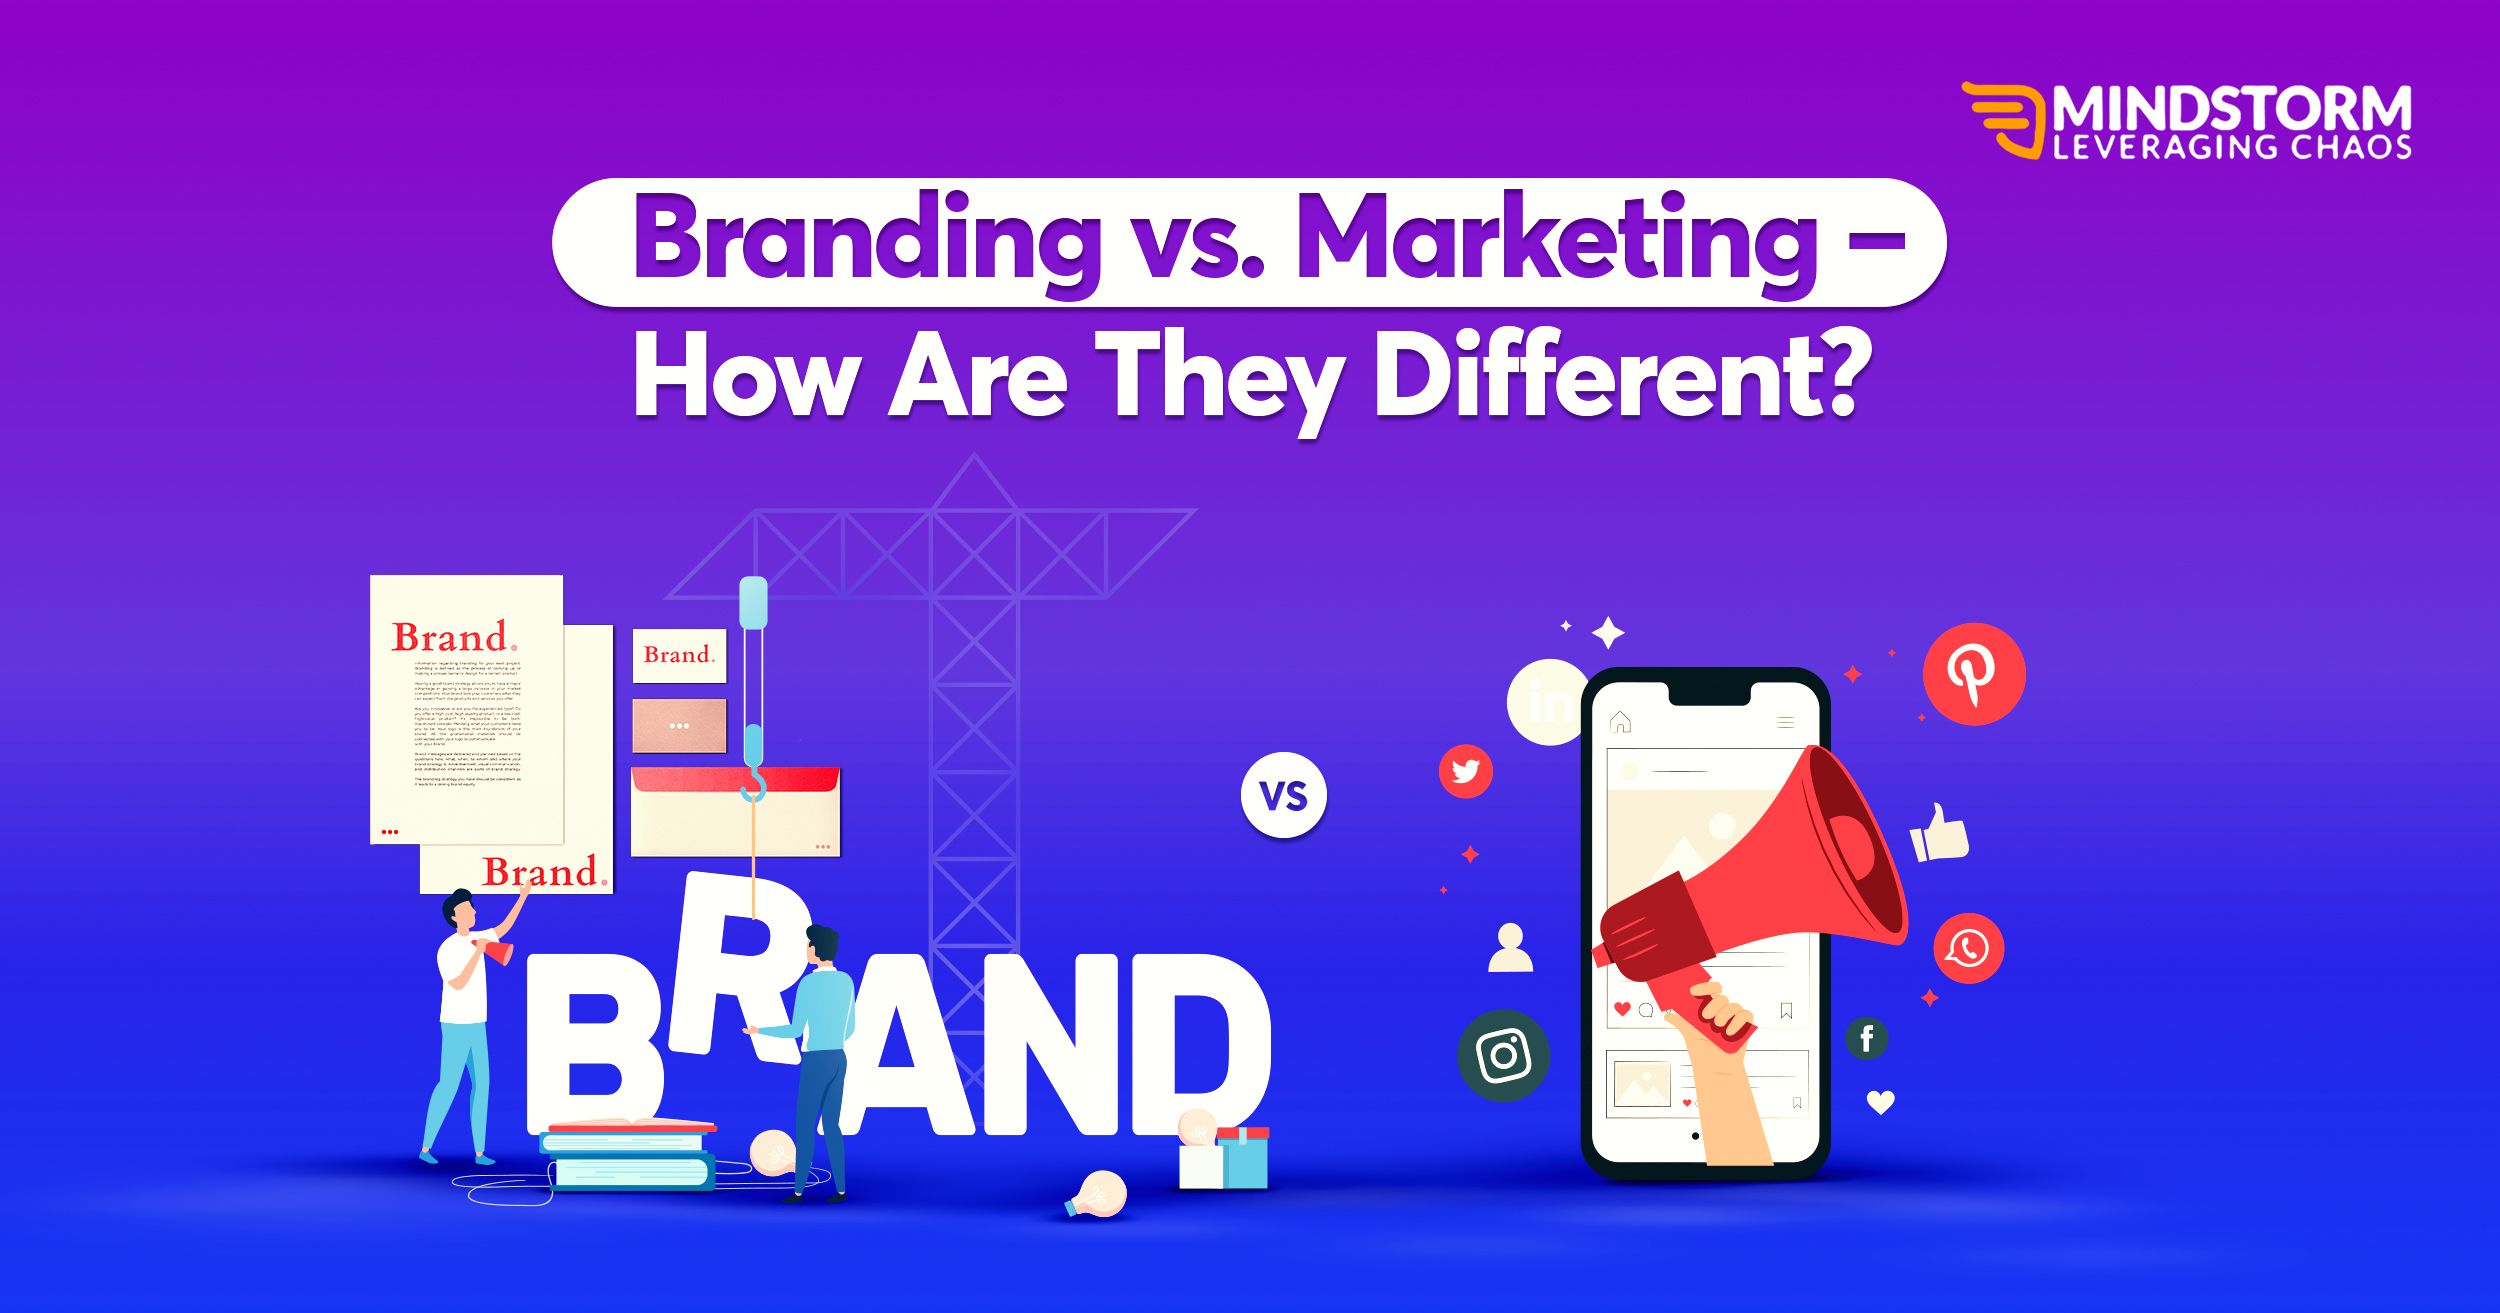 Branding vs. Marketing – how are they different?